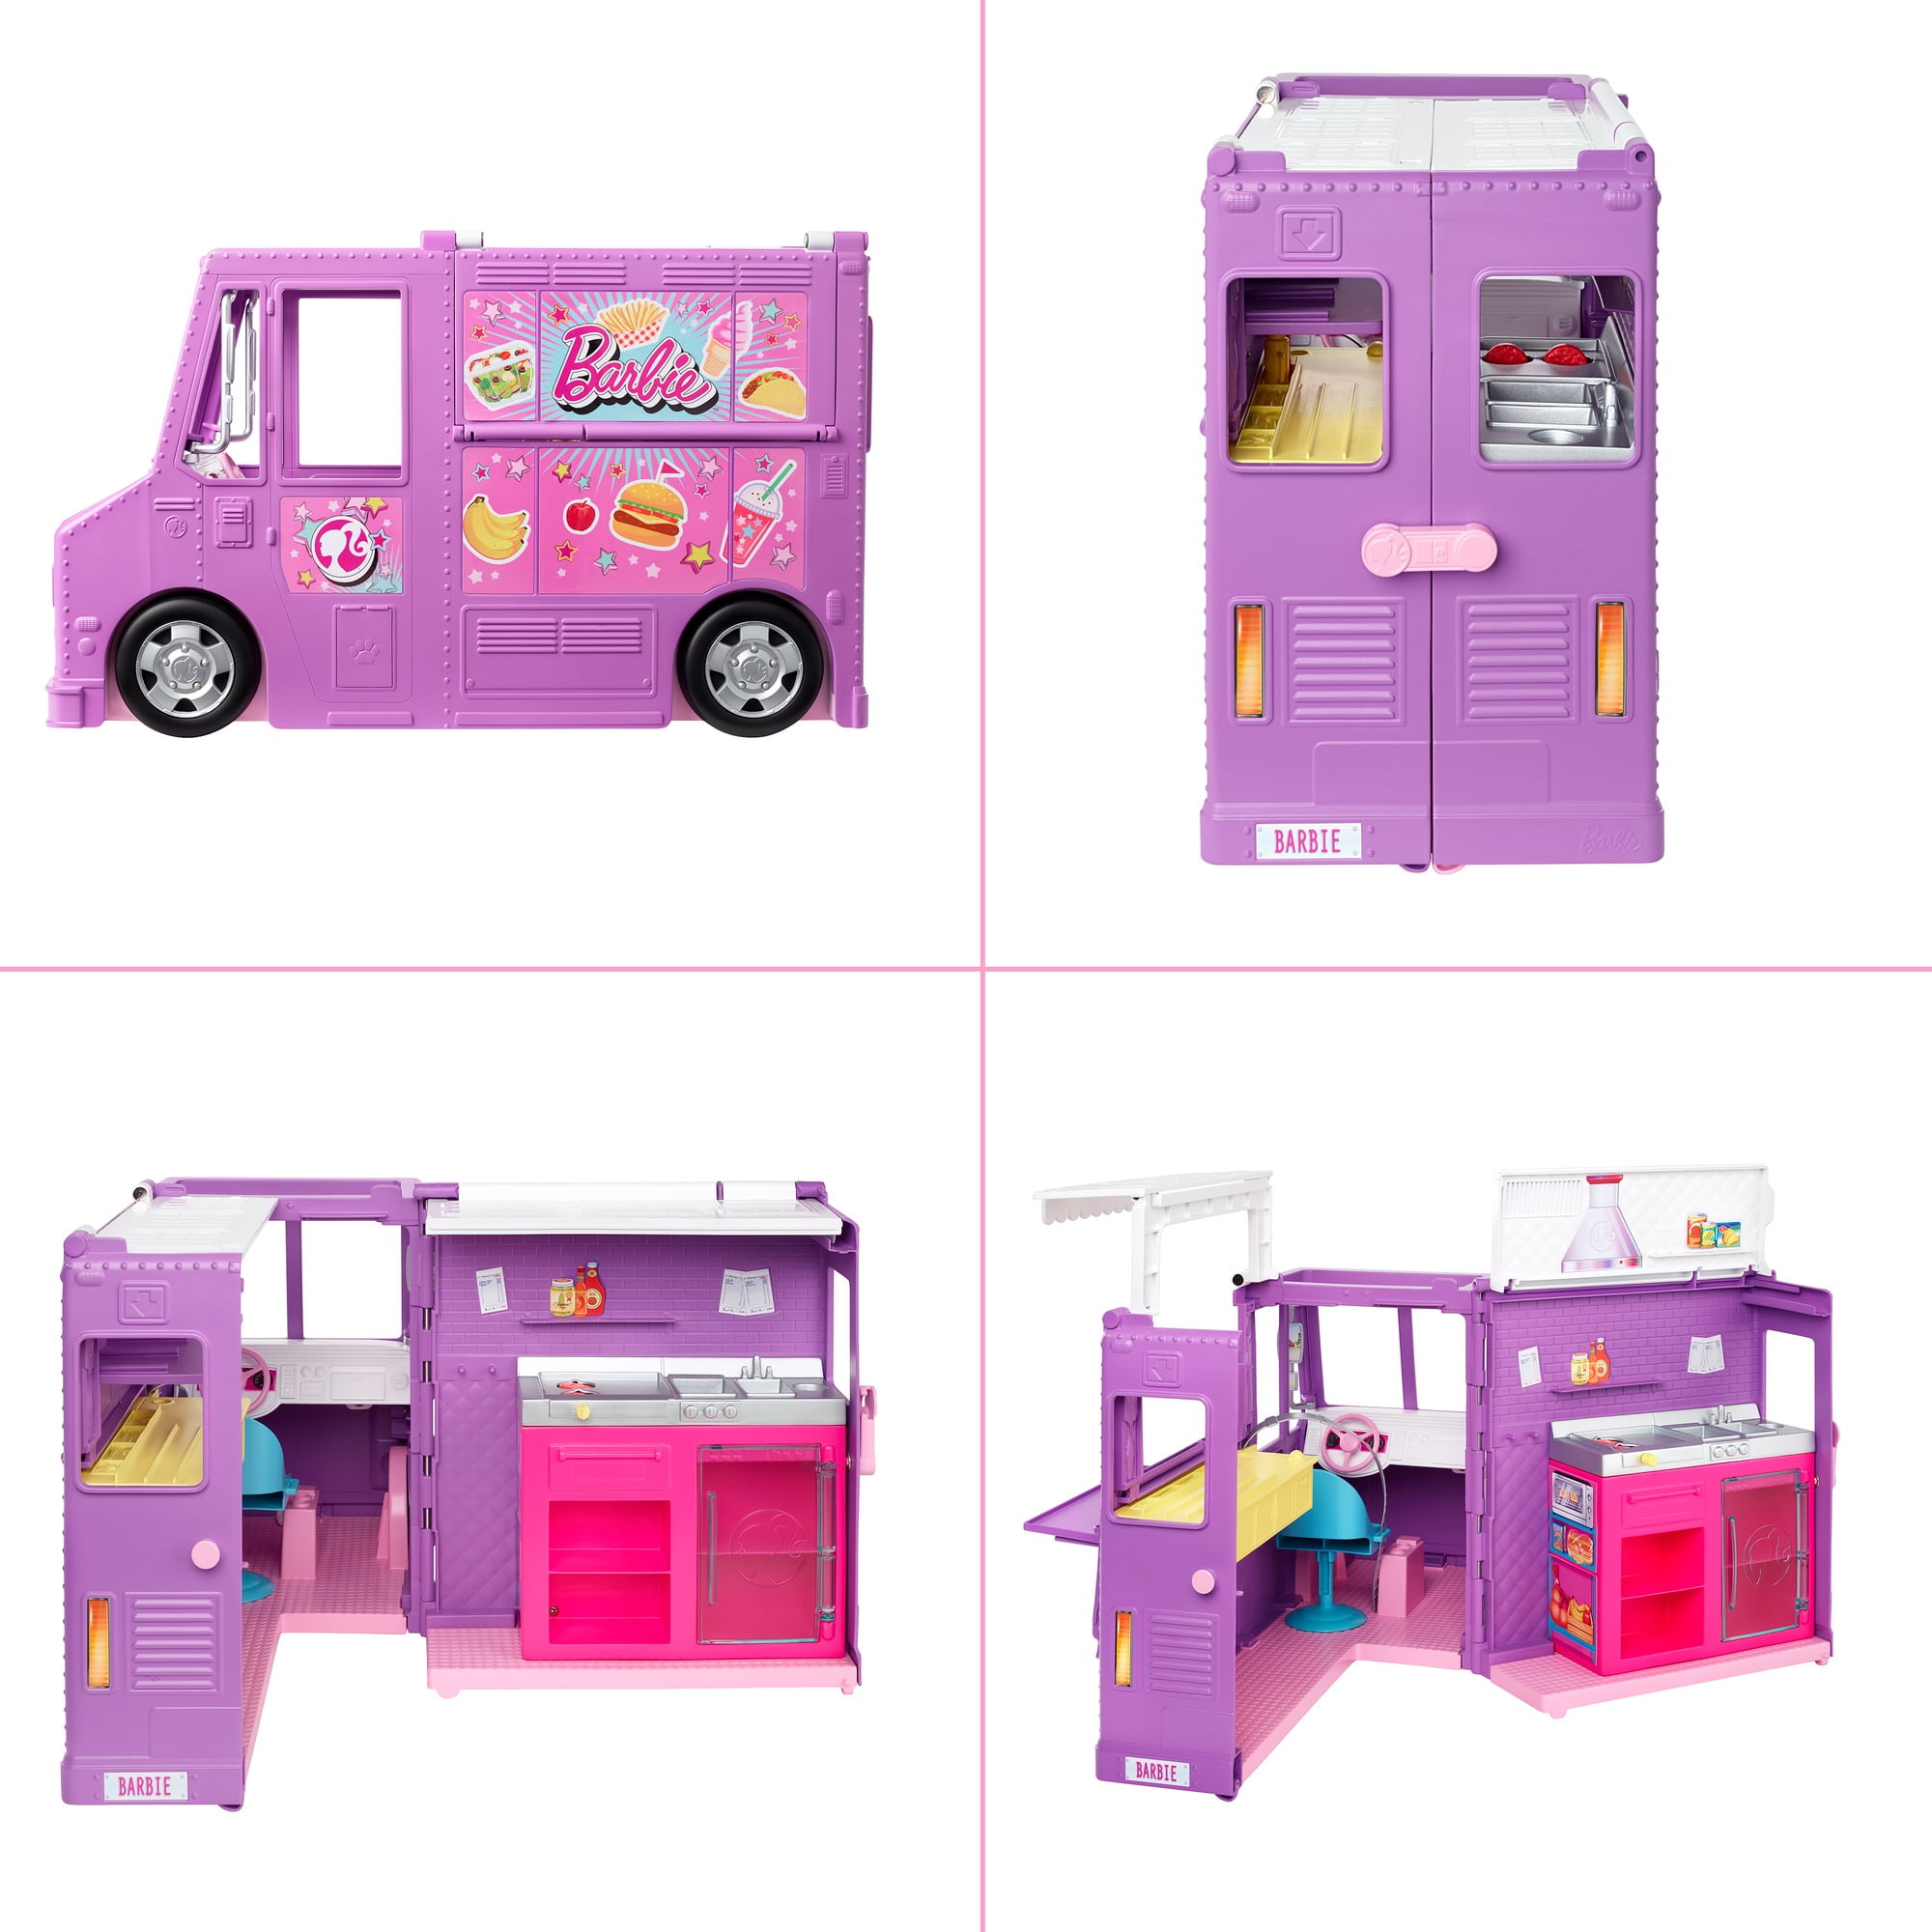 barbie food truck life size